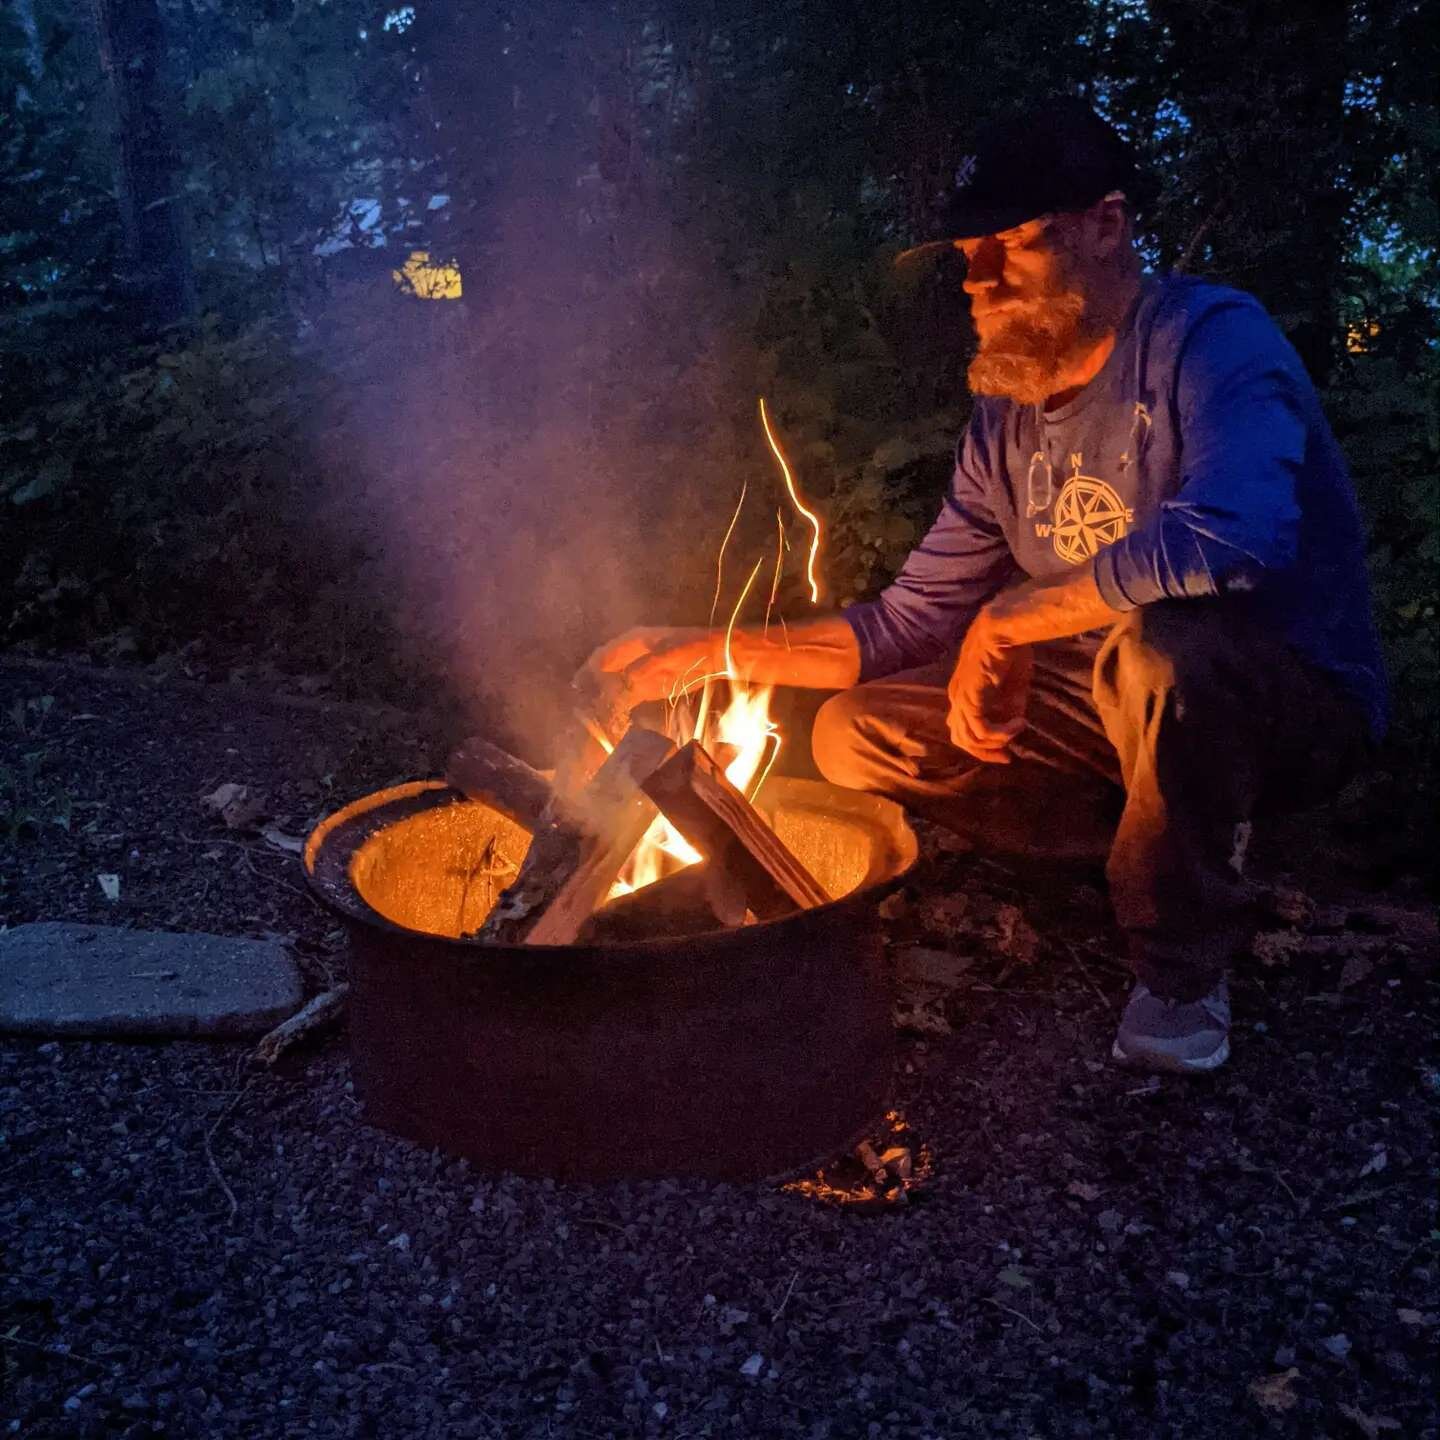 Another successful week down and meteorological summer has passed here in ME... Bring on FALL! Another campfire dinner of course with help from cast iron skillets and a deep fryer! #rvfoodie #rvlifestyle #rvrepair #rvnomads #mobilervtech #mobilervser